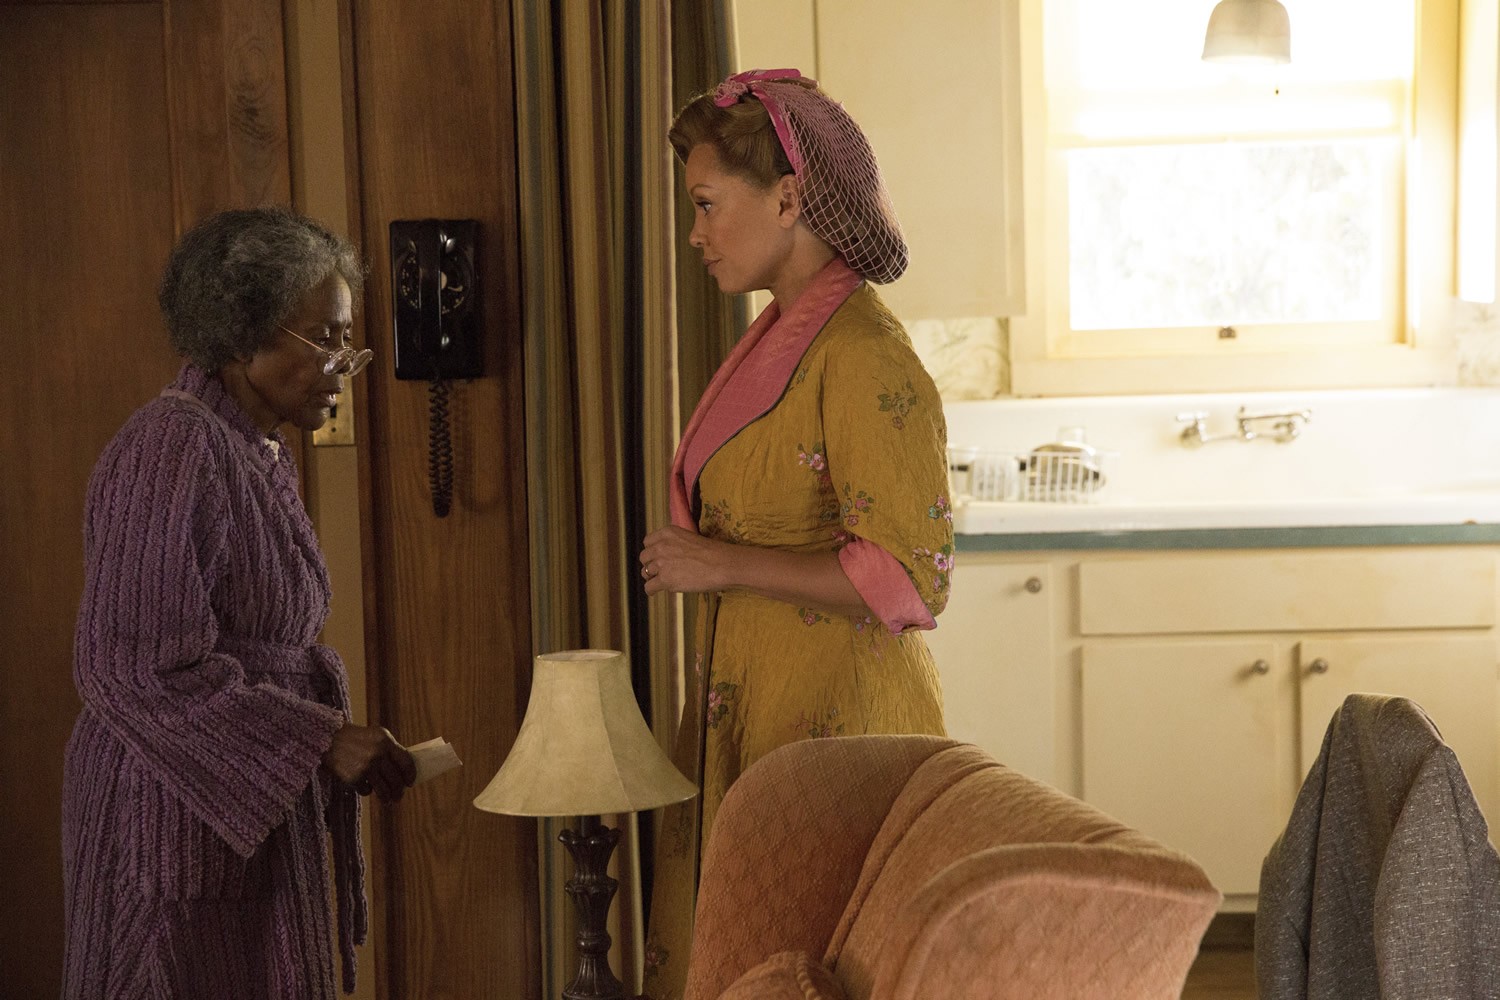 Cicely Tyson stars as Mrs. Watts and Vanessa Williams stars as Jessie Mae Watts in Lifetime's The Trip to Bountiful (2014). Photo credit by Bob Mahoney.